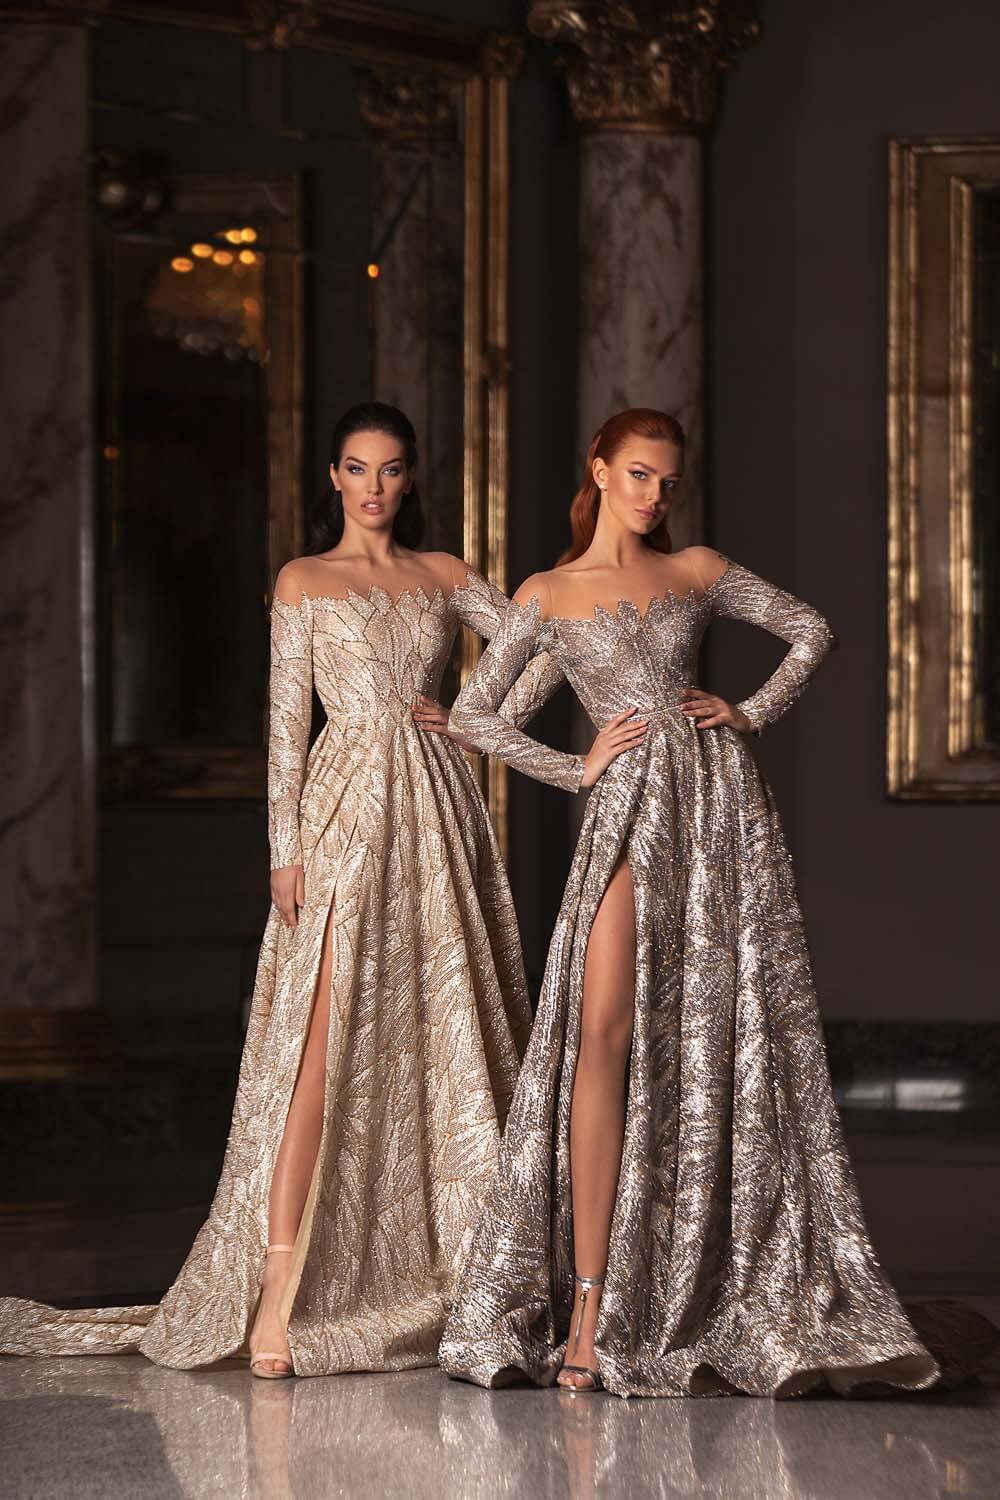 Check out these evening dresses 2022 from esposa!